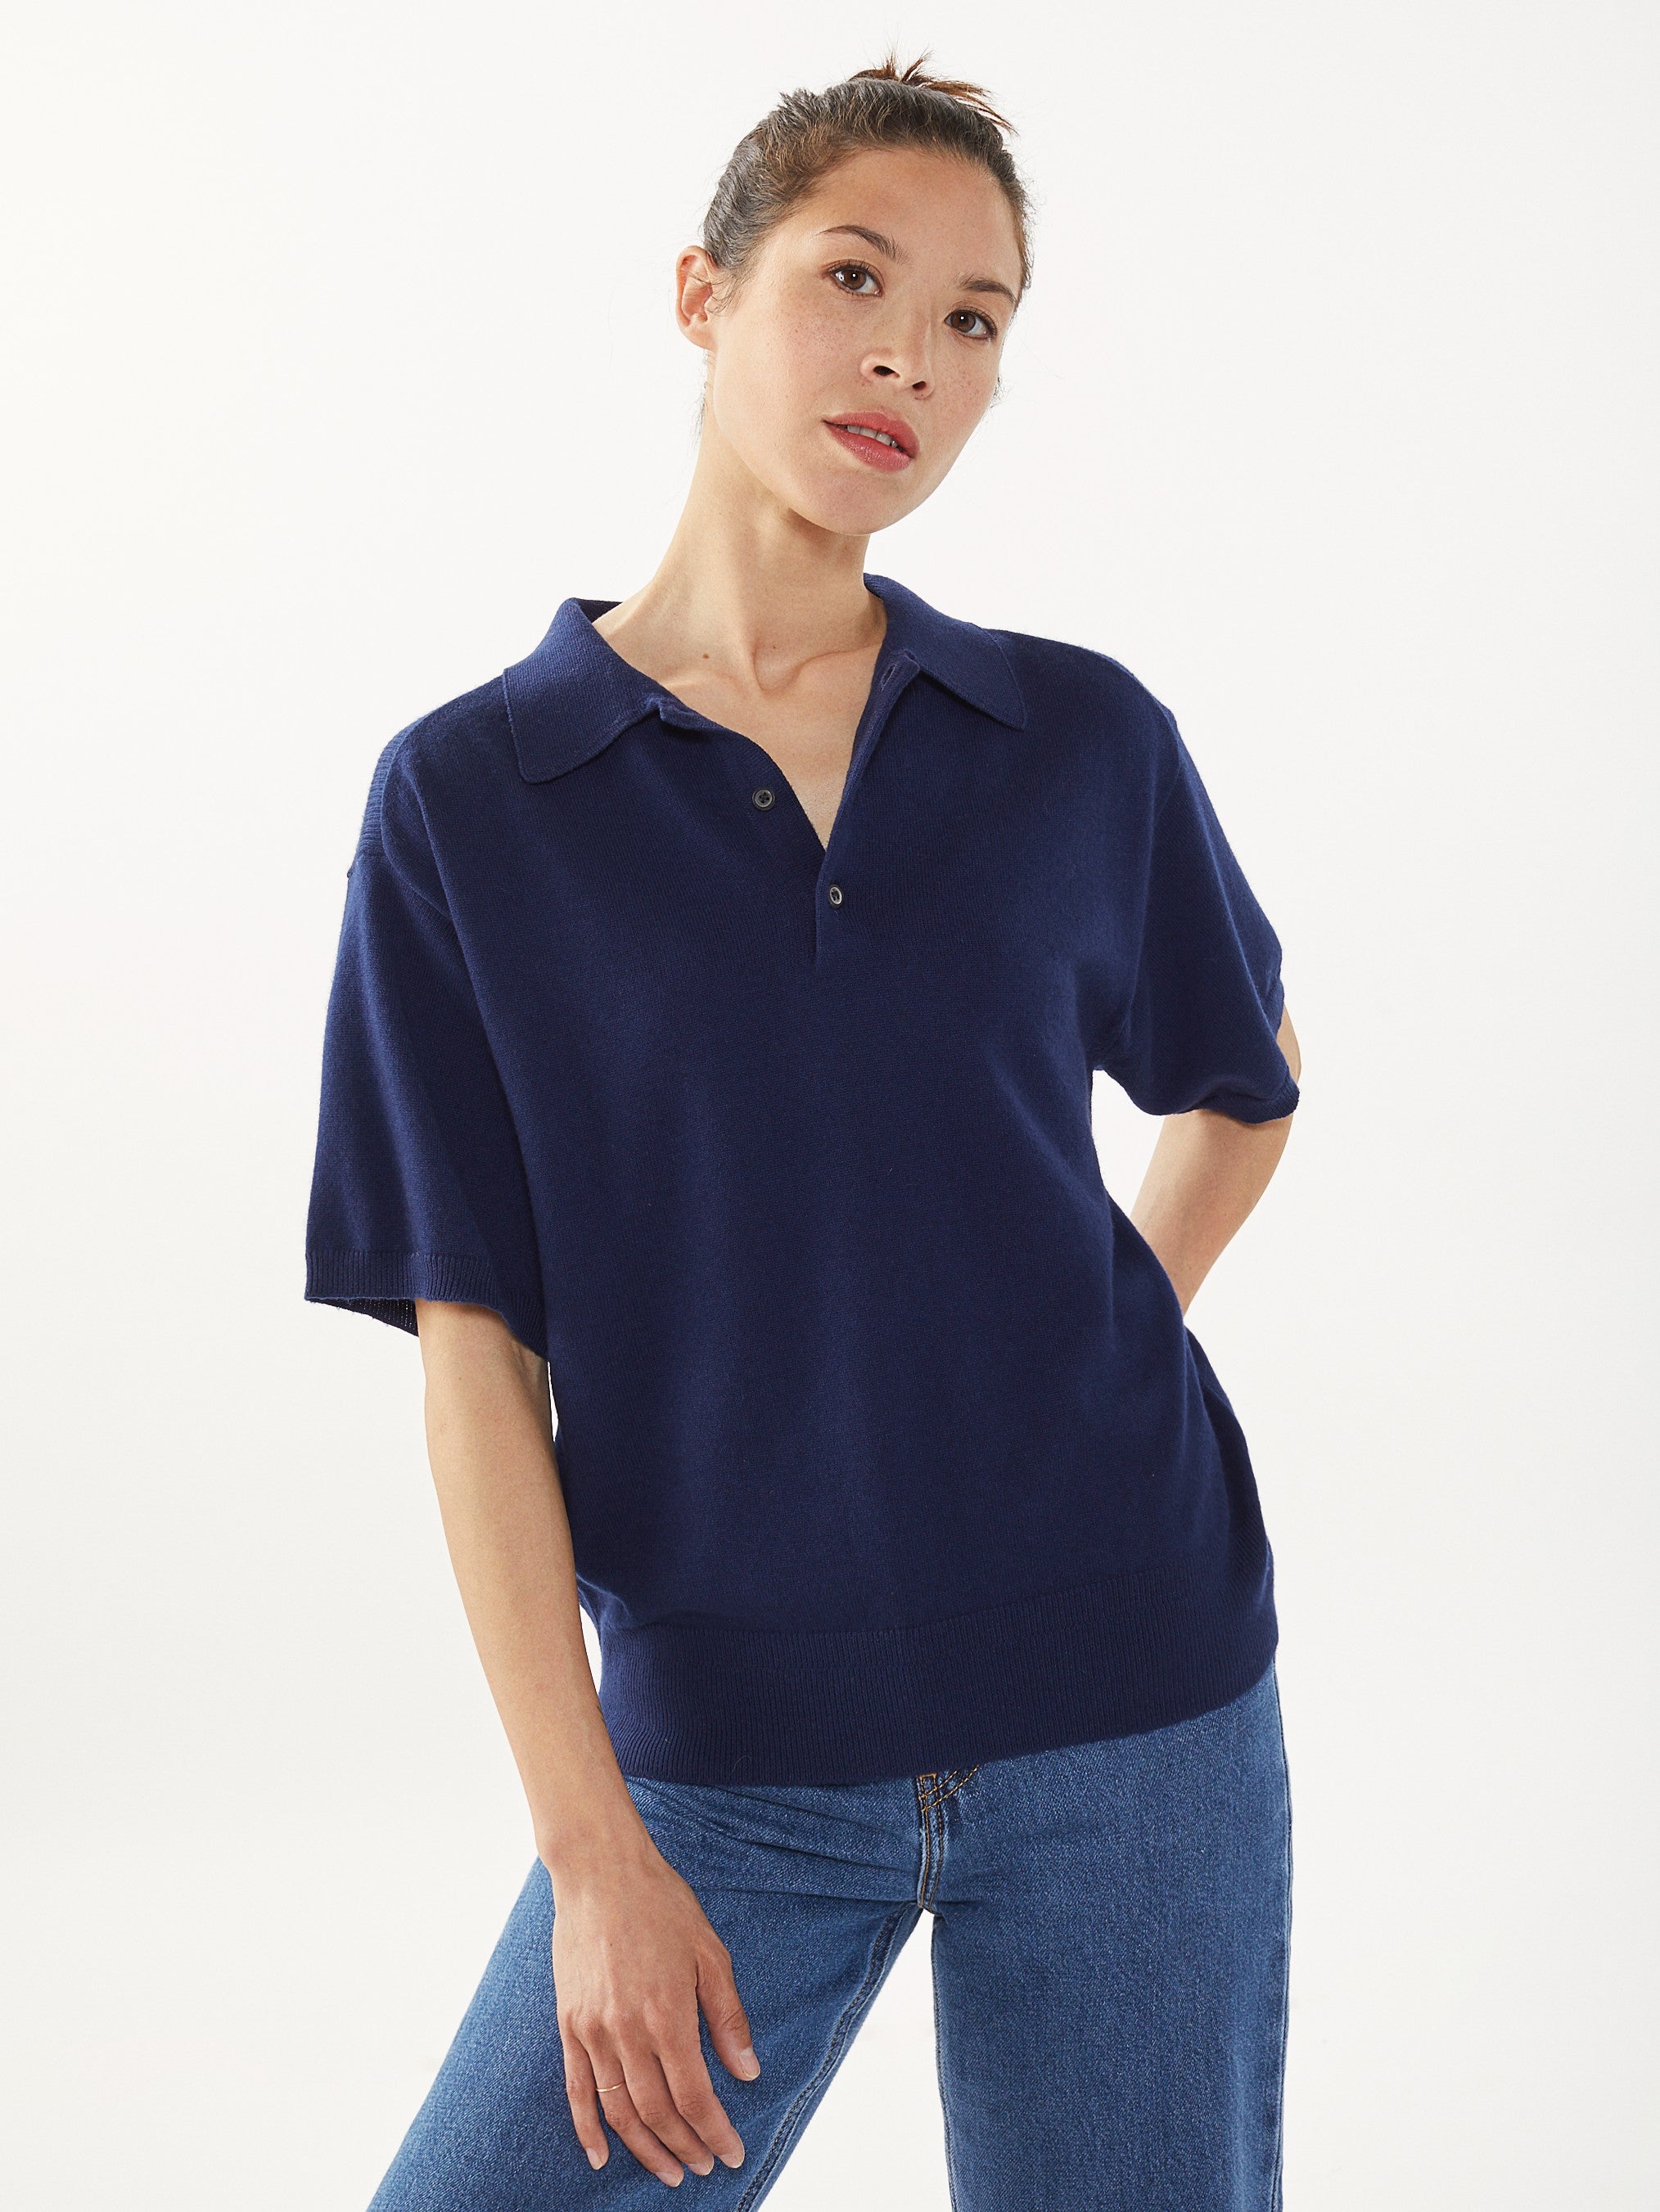 Women's polo shirt made of recycled Cashmere and cotton Navy